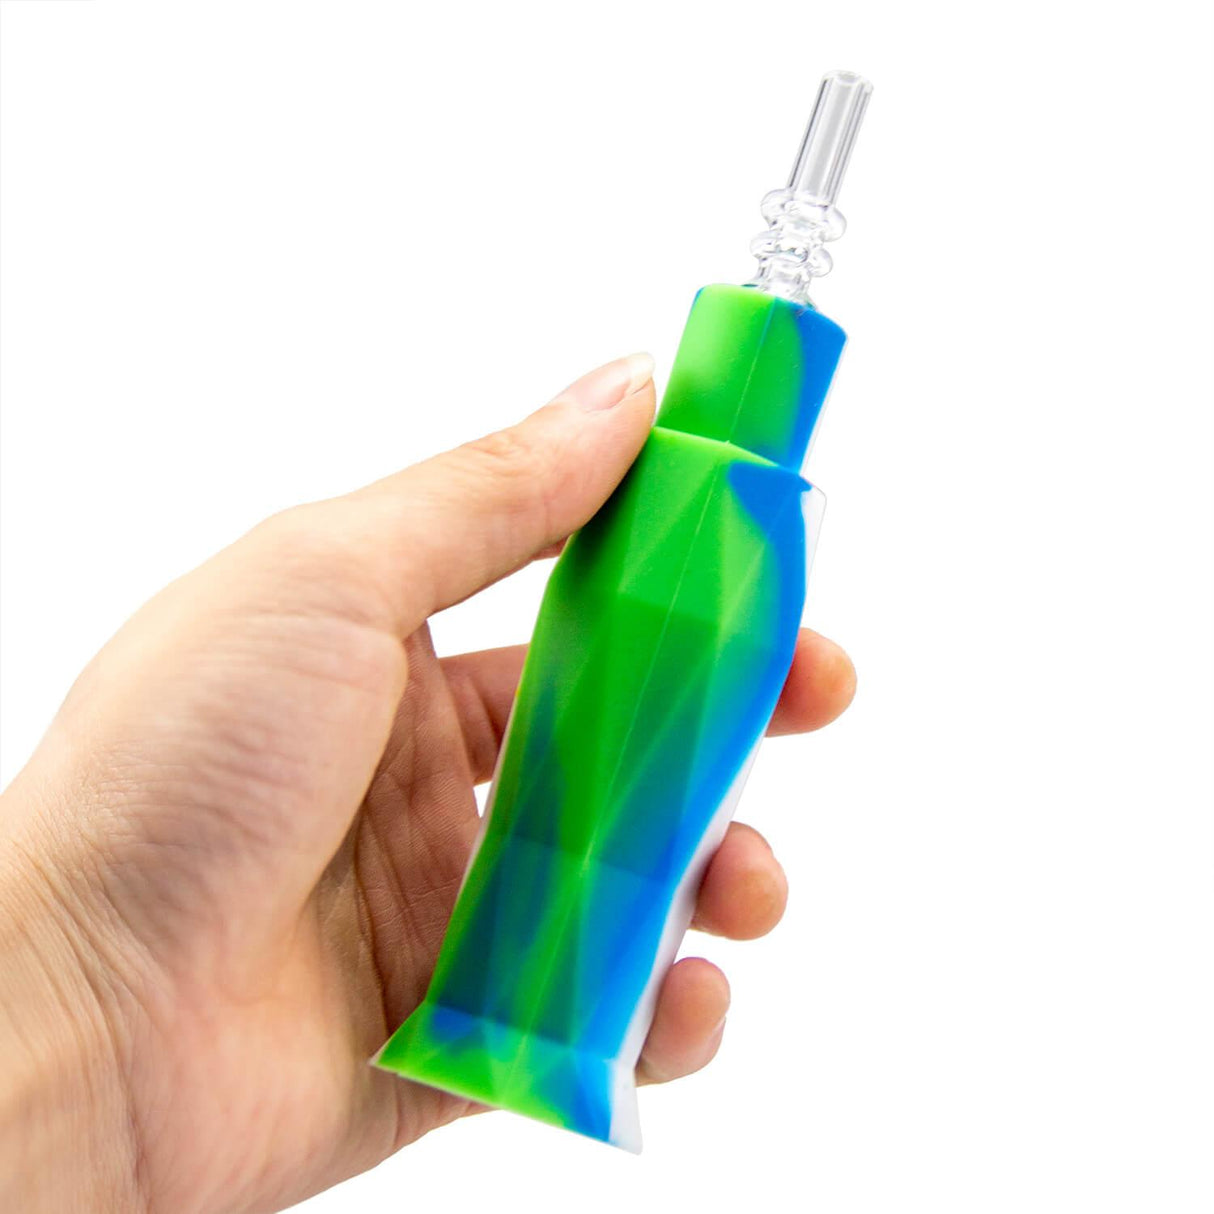 PILOT DIARY Mini Nectar Collector Kit in hand, vibrant green and blue, with glass tip